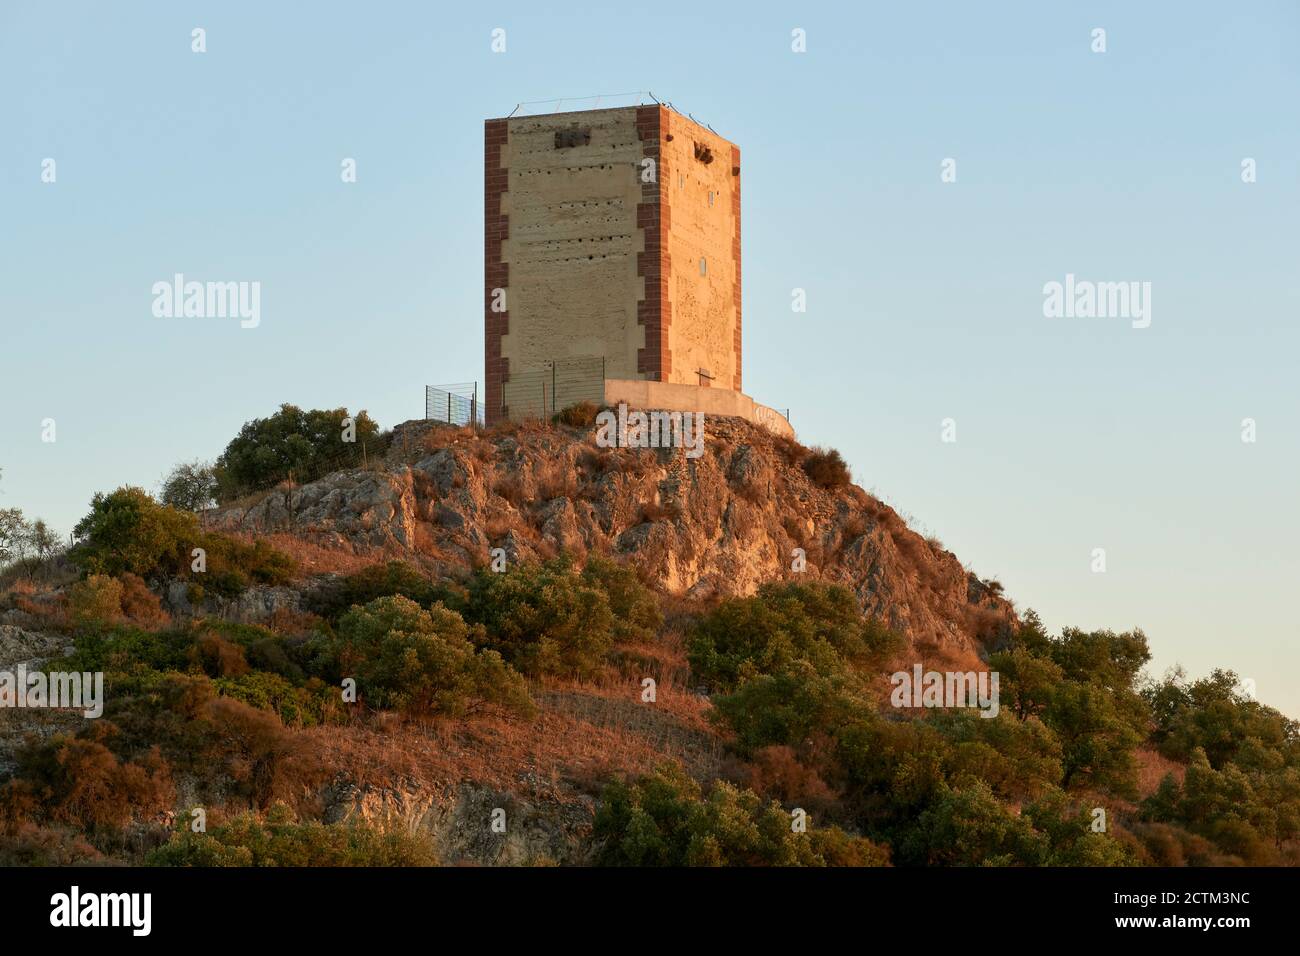 reconstruction of the keep of the castle of Anzur de Puente Genil, Cordoba. Analucia, Spain Stock Photo